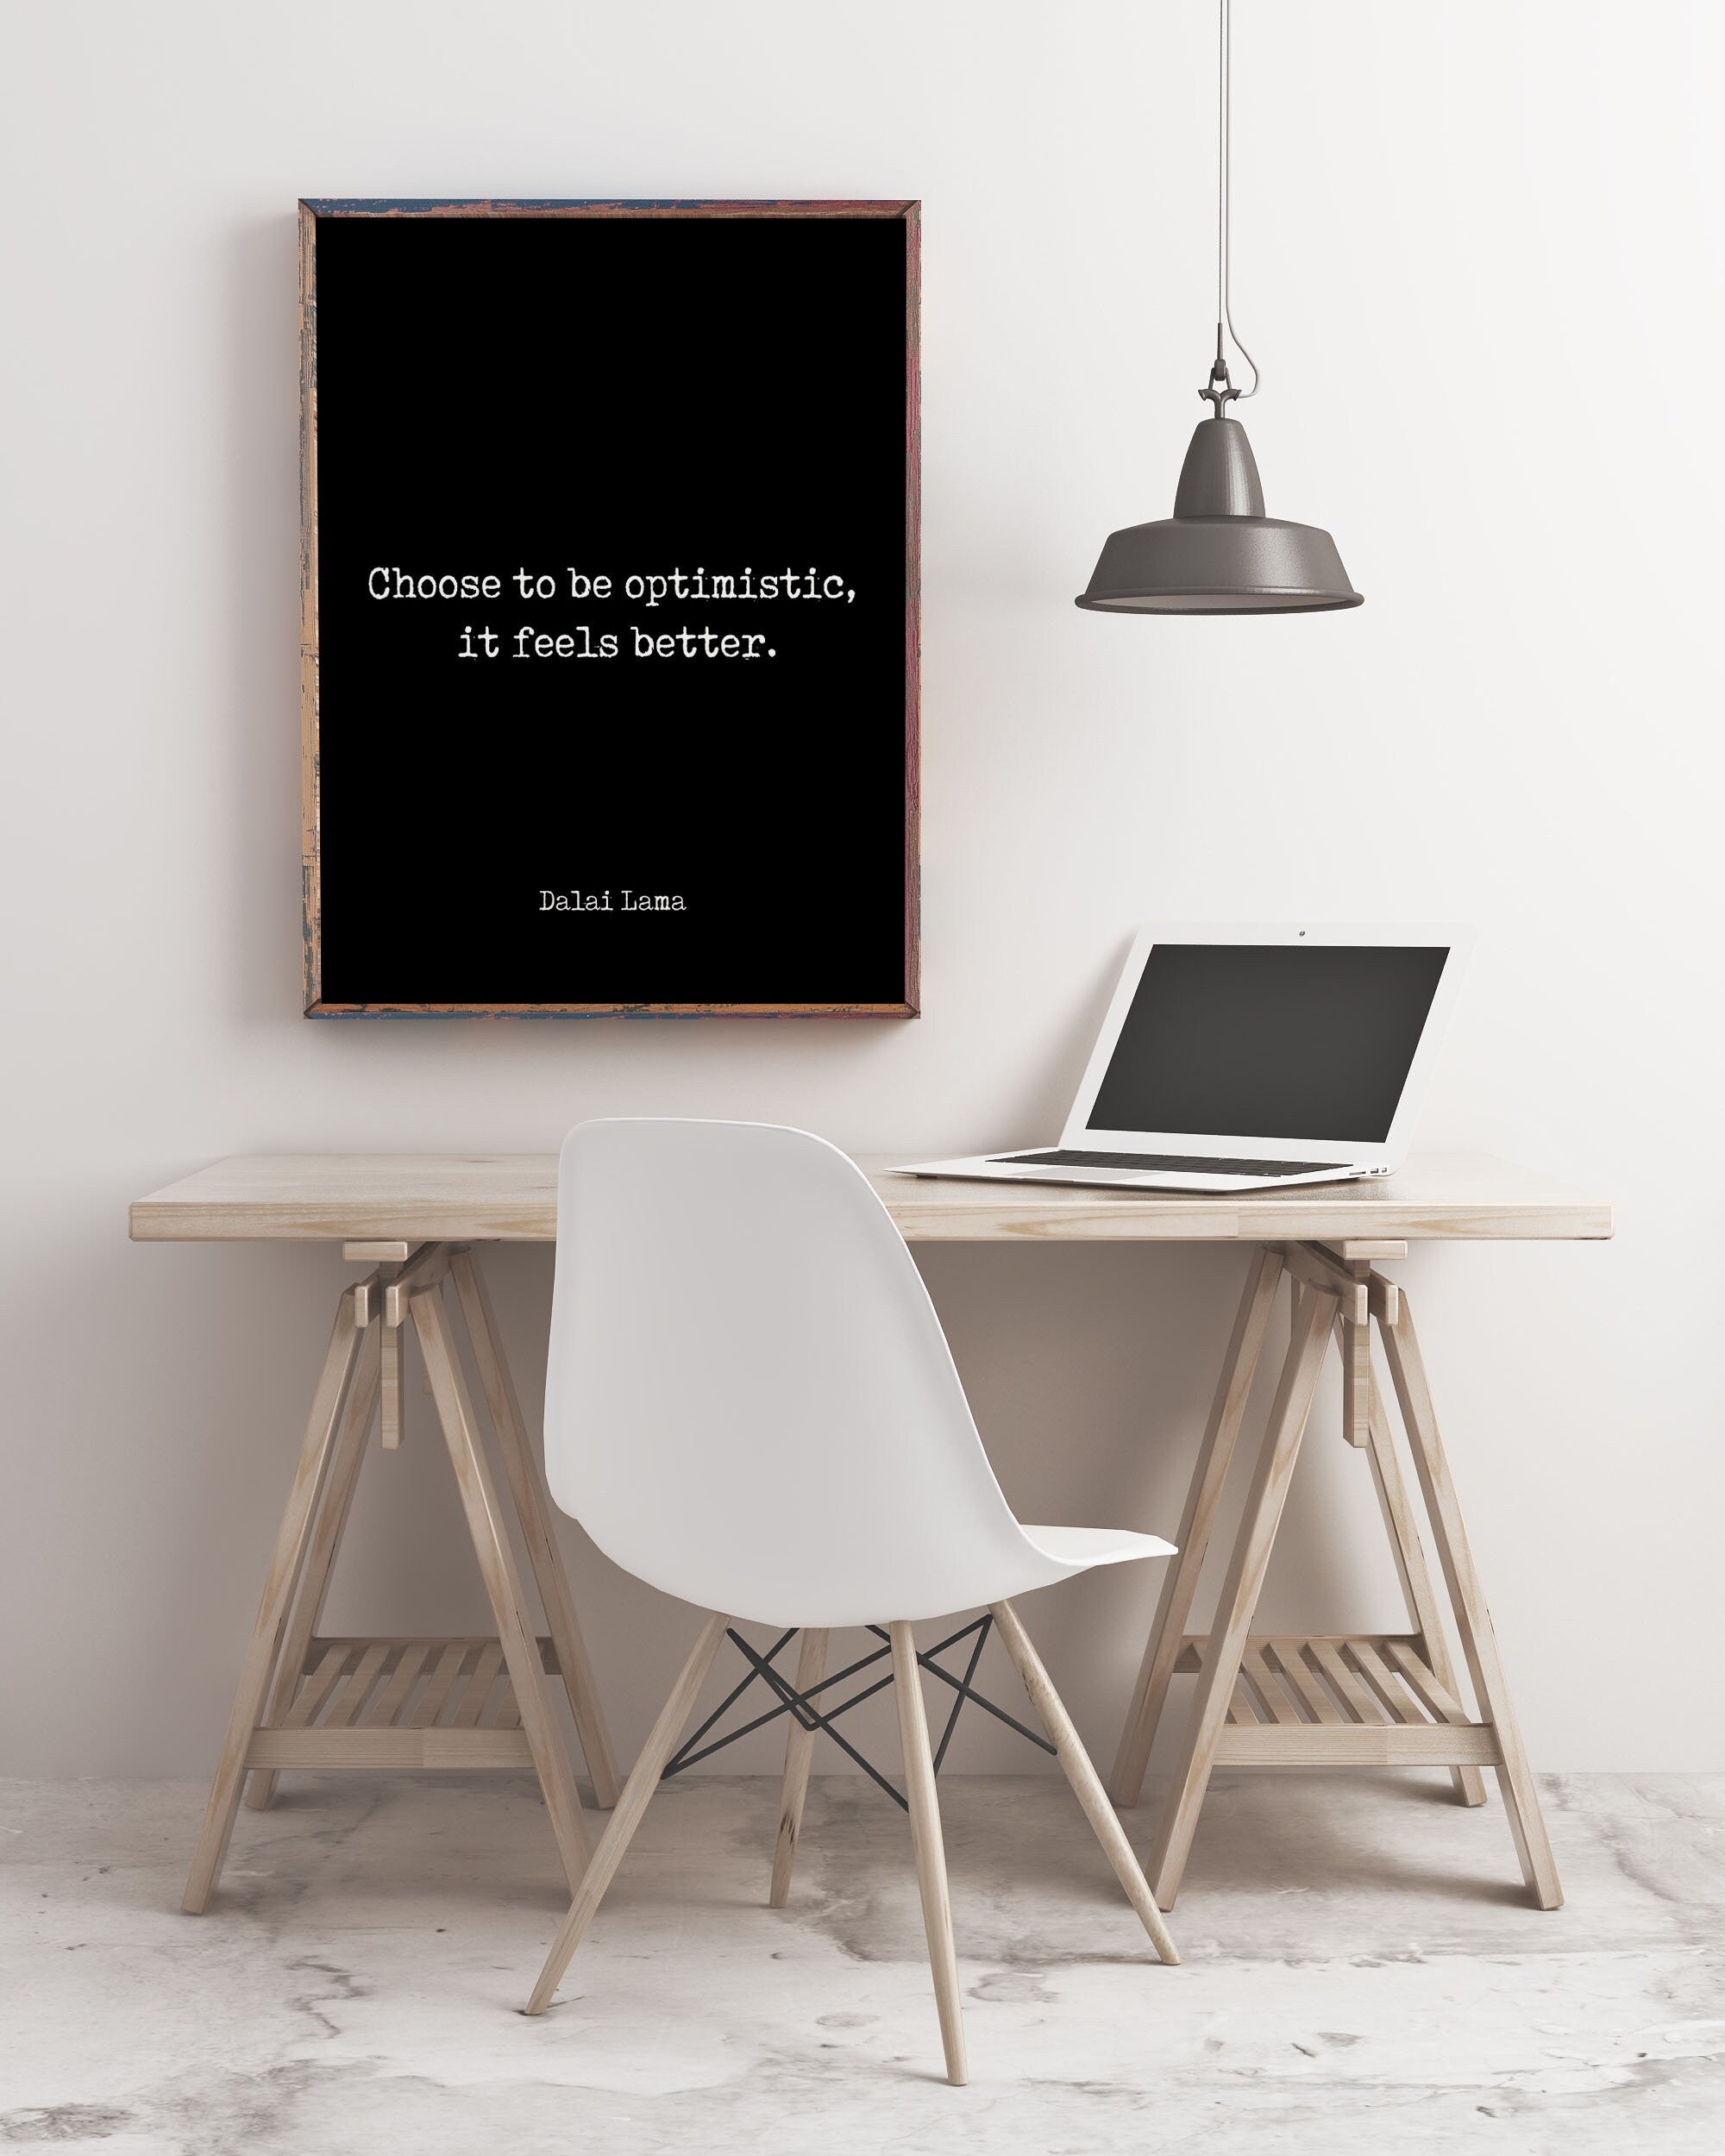 Dalai Lama life quote inspirational print in black and white, office wall art or home decor print